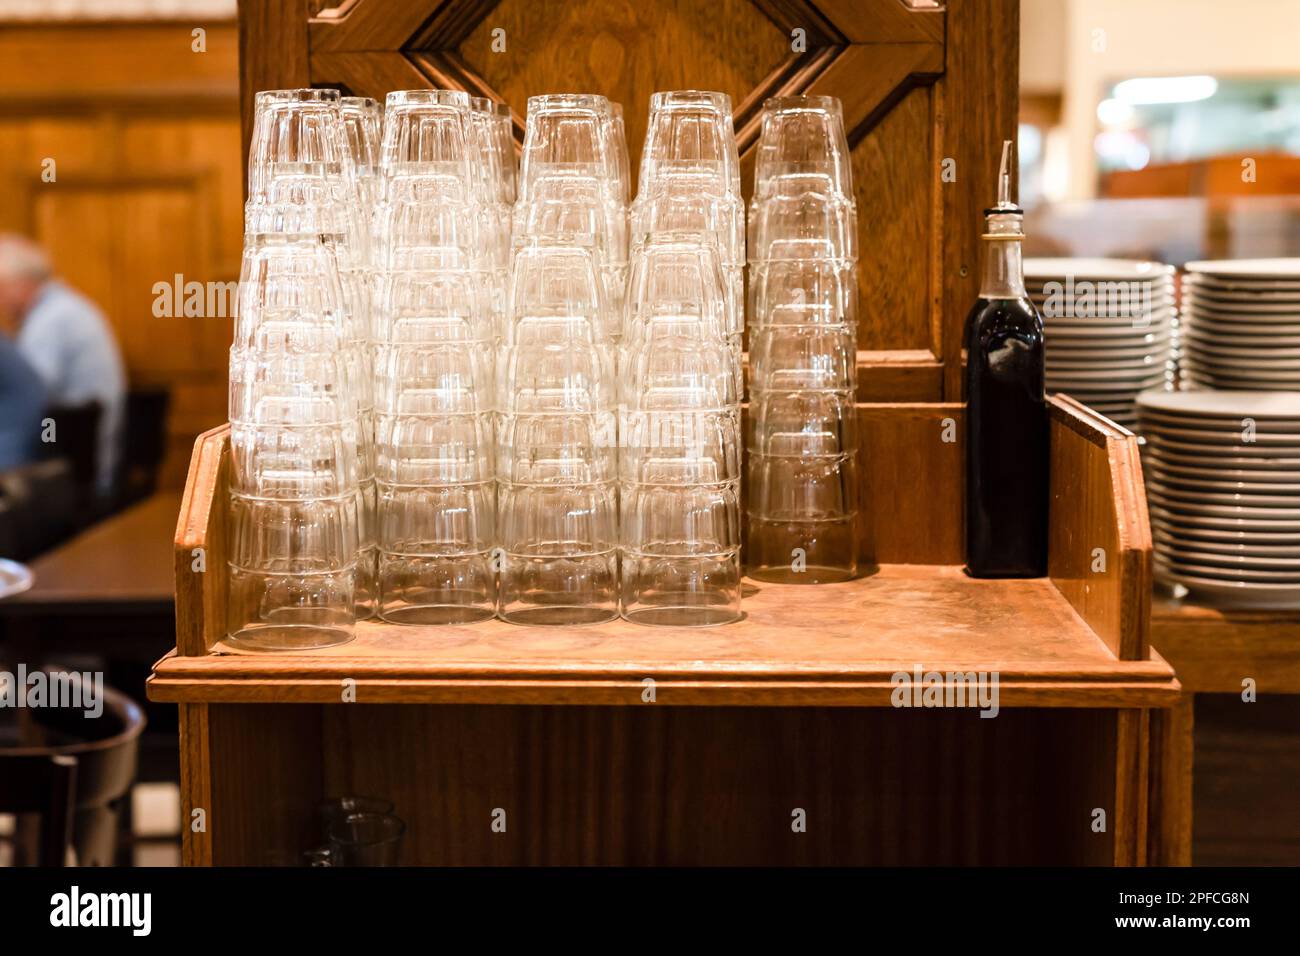 Stacks of clean empty glasses in a restaurant Stock Photo